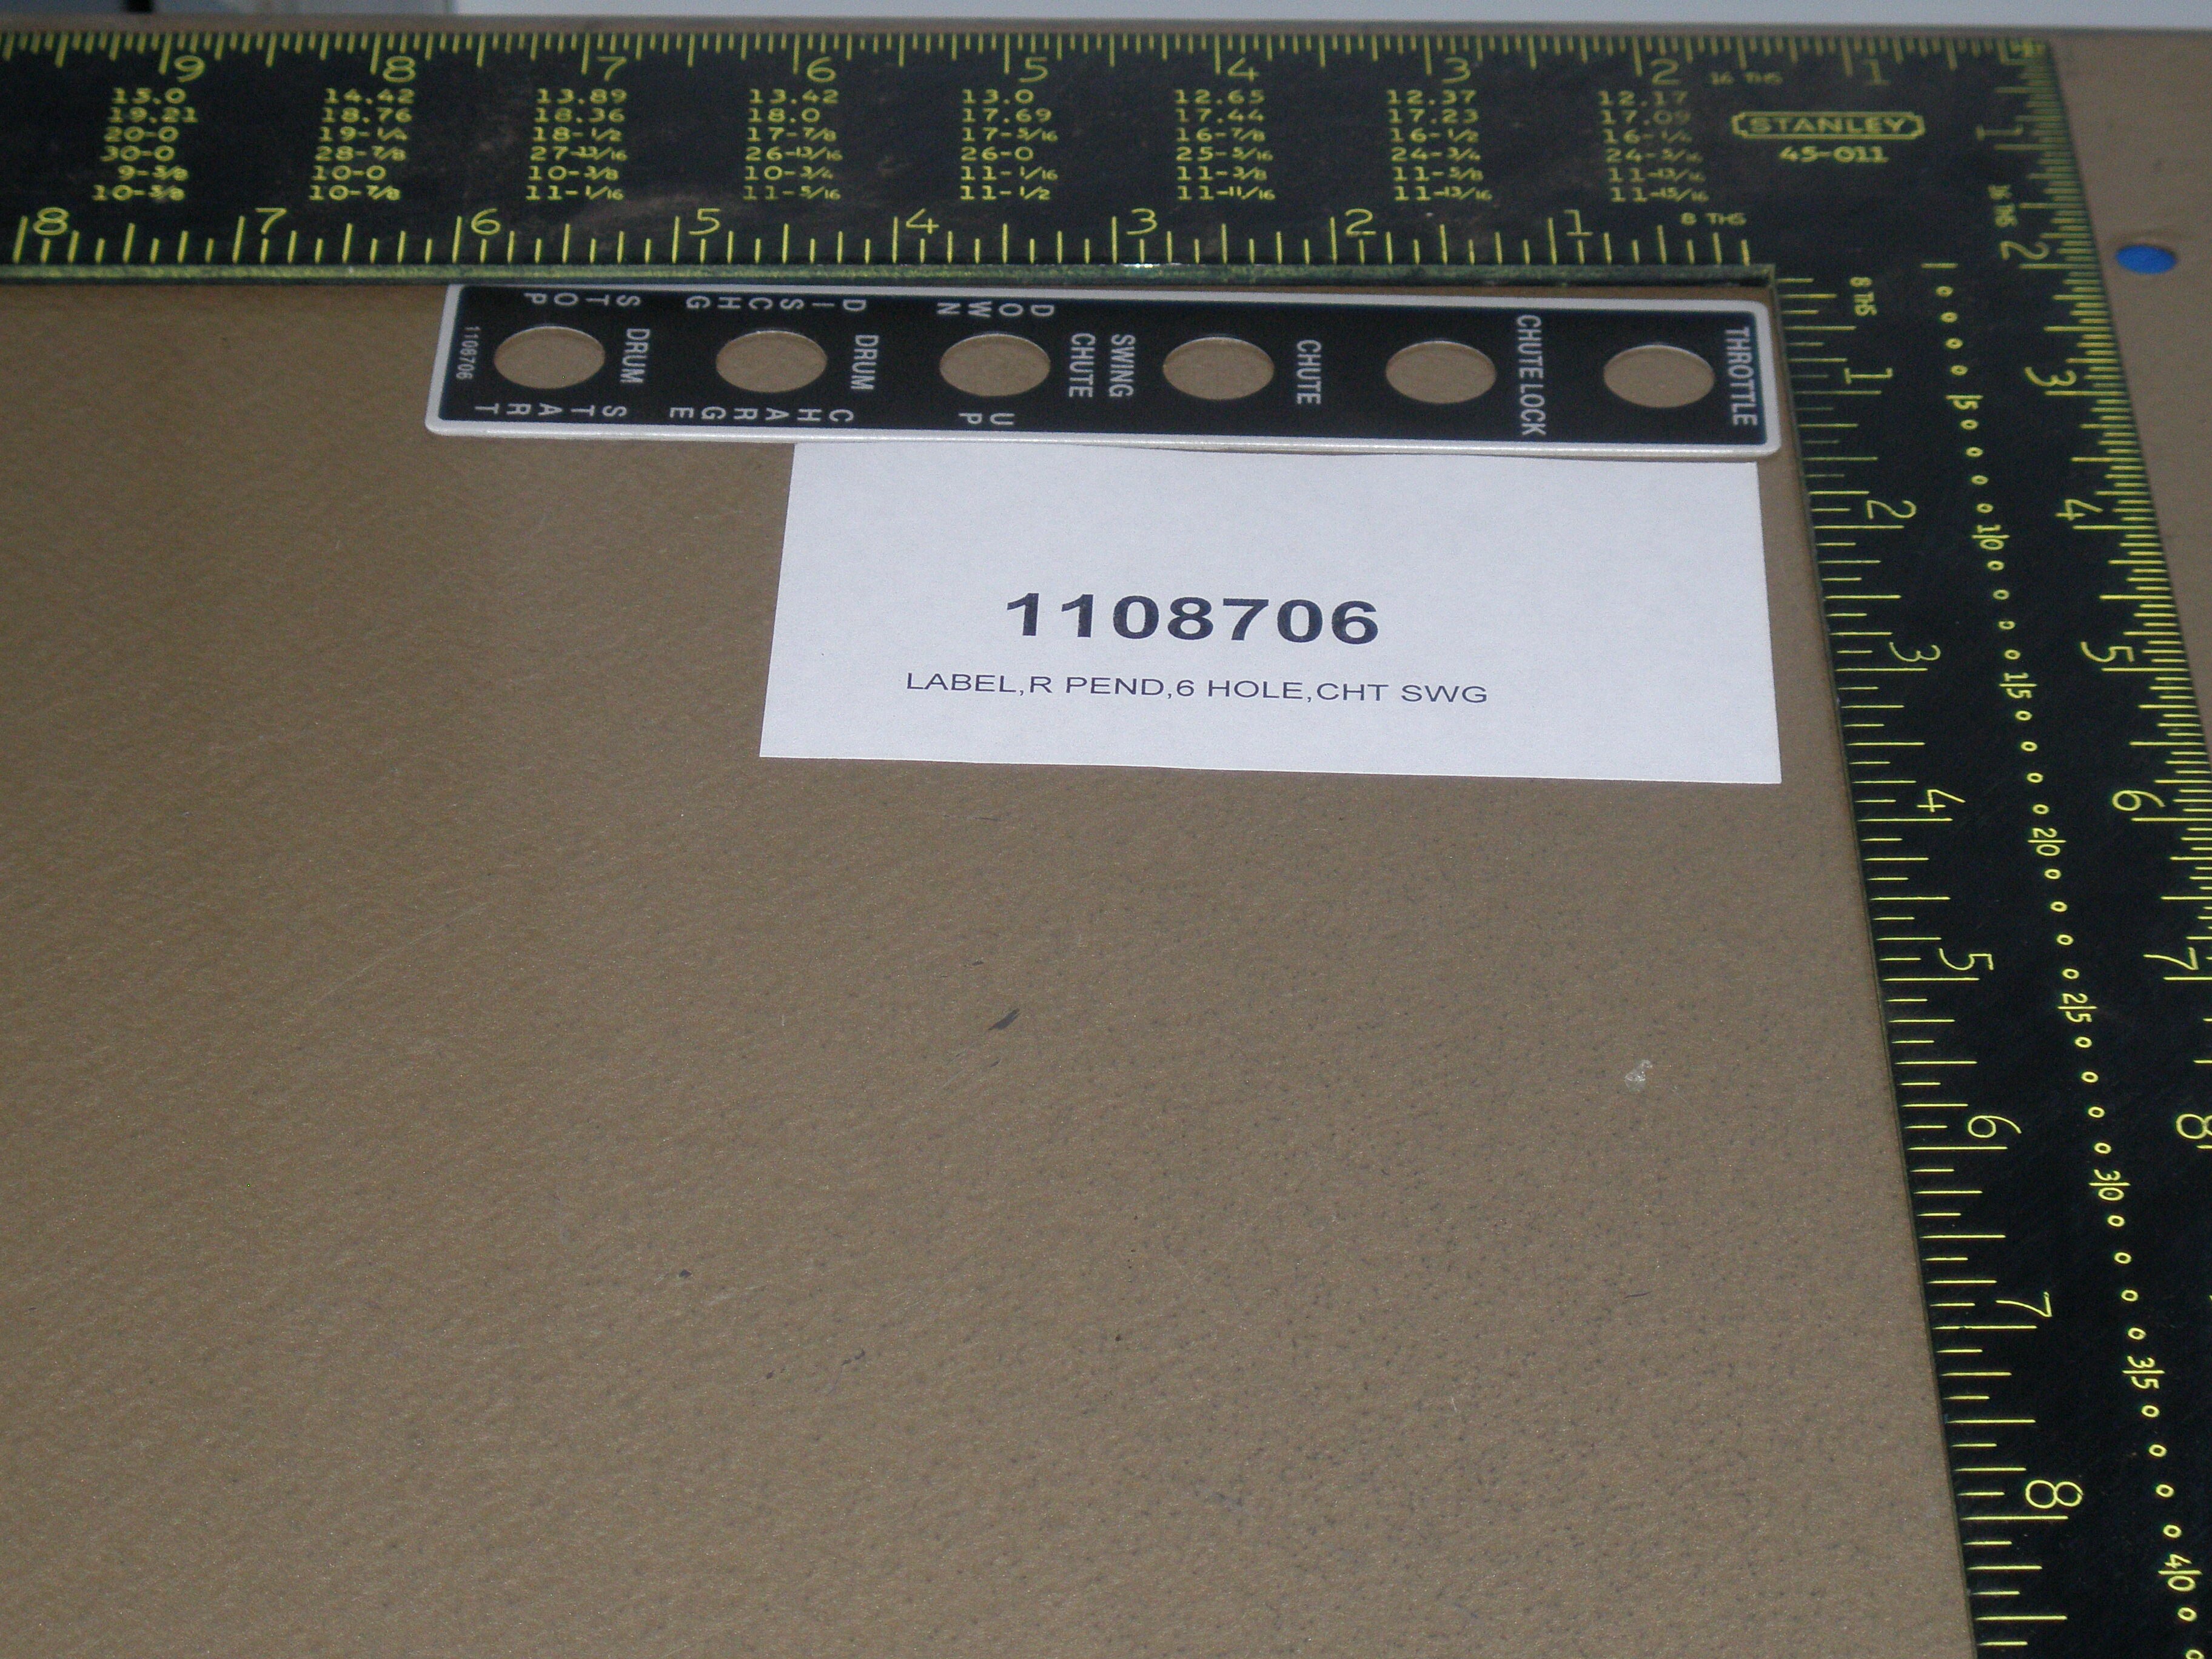 LABEL,R PEND,6 HOLE,CHT SWG